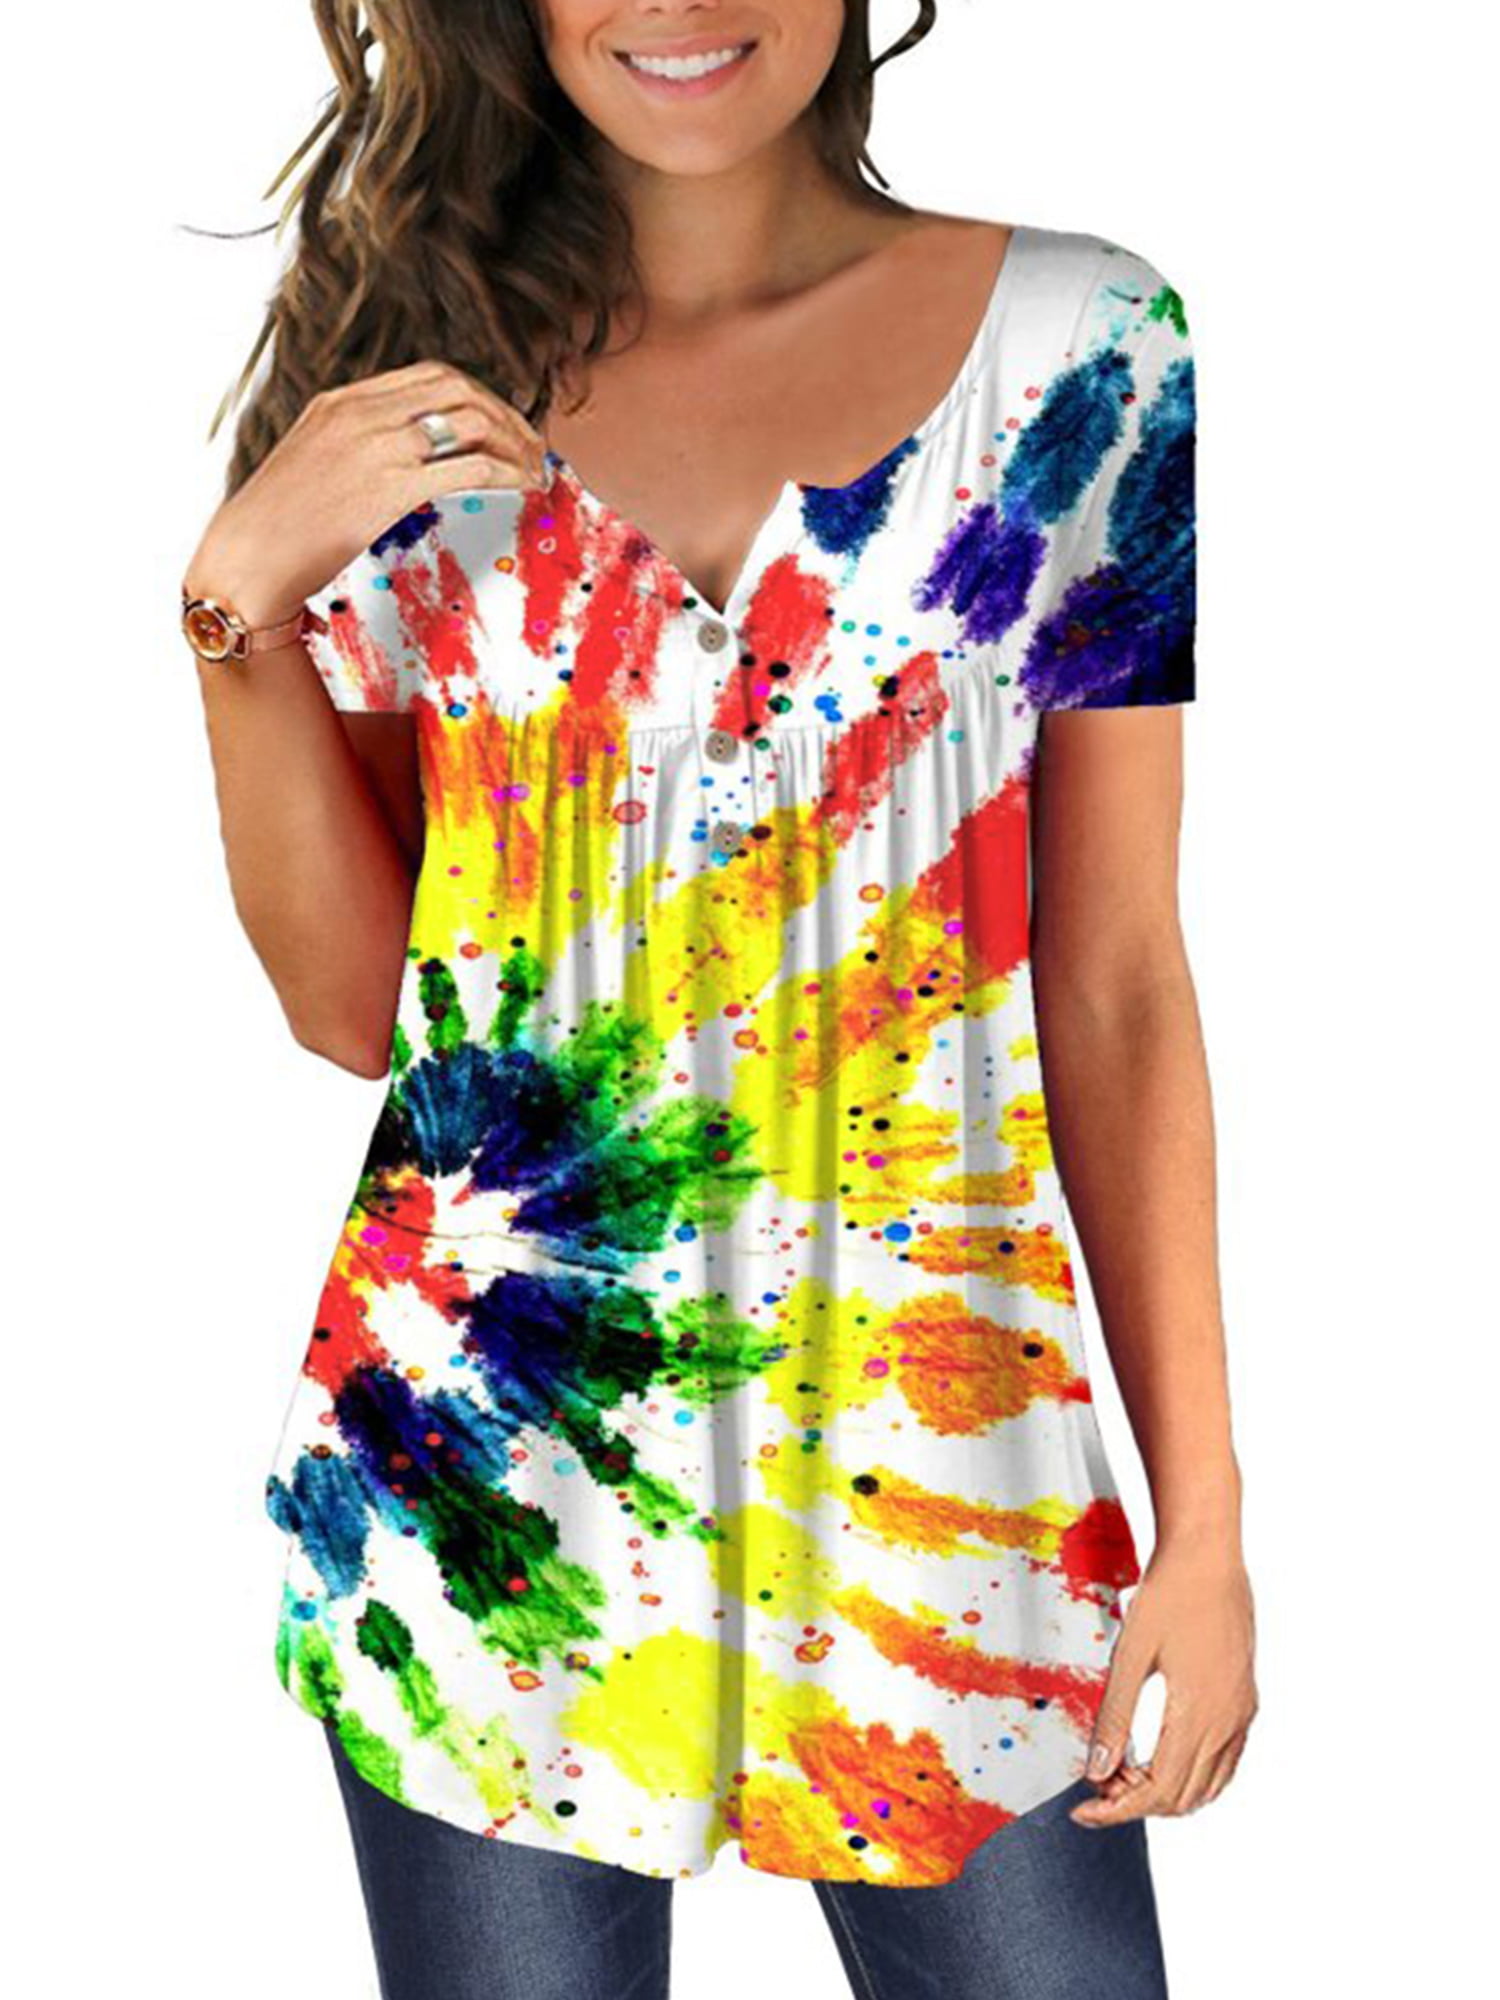 LilyLLL Womens Tie Dye Printed Short Sleeve Loose T-shirt Blouse Tops ...